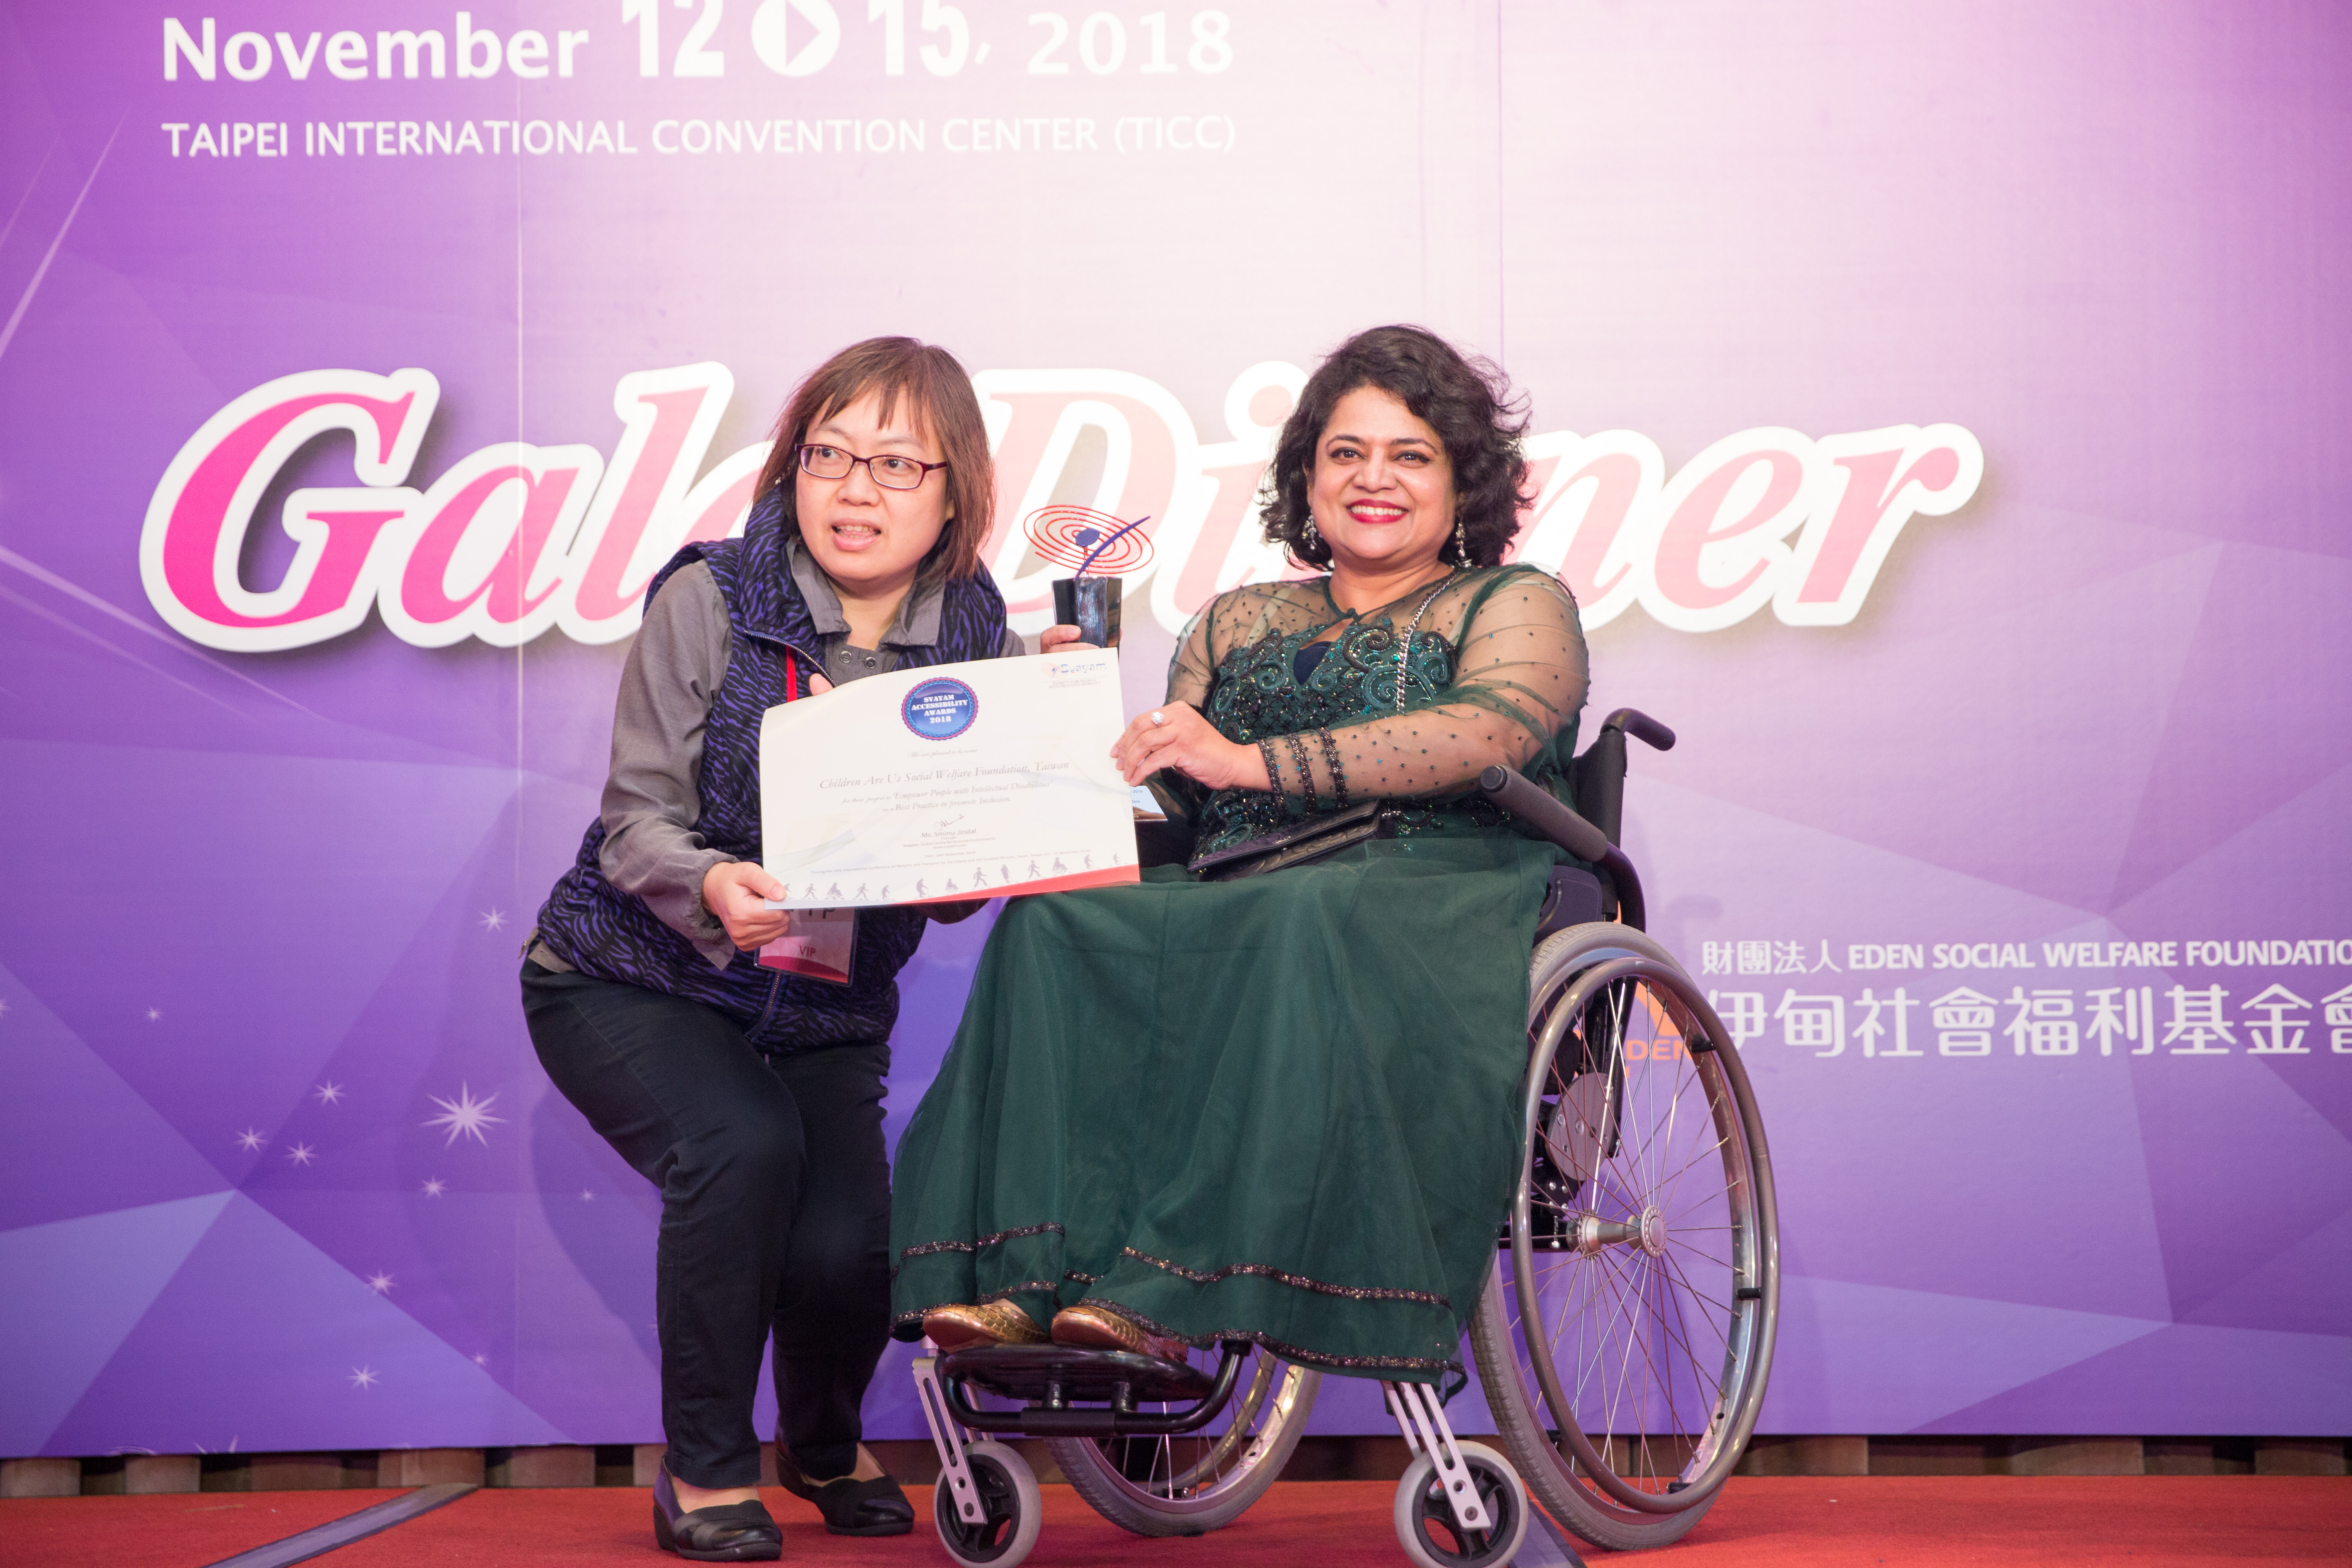 Photo of Ms. Sunny Hu, Director, Public Affairs, Children Are Us Social Welfare Foundation, Taiwan, receiving Svayam Accessibility Award 2018 from Svayam Founder Ms. Sminu Jindal at Taipei on 14 Nov 2018 on the sidelines of 15th International Conference on Mobility and Transport for Elderly and Disabled Persons (TRANSED2018)